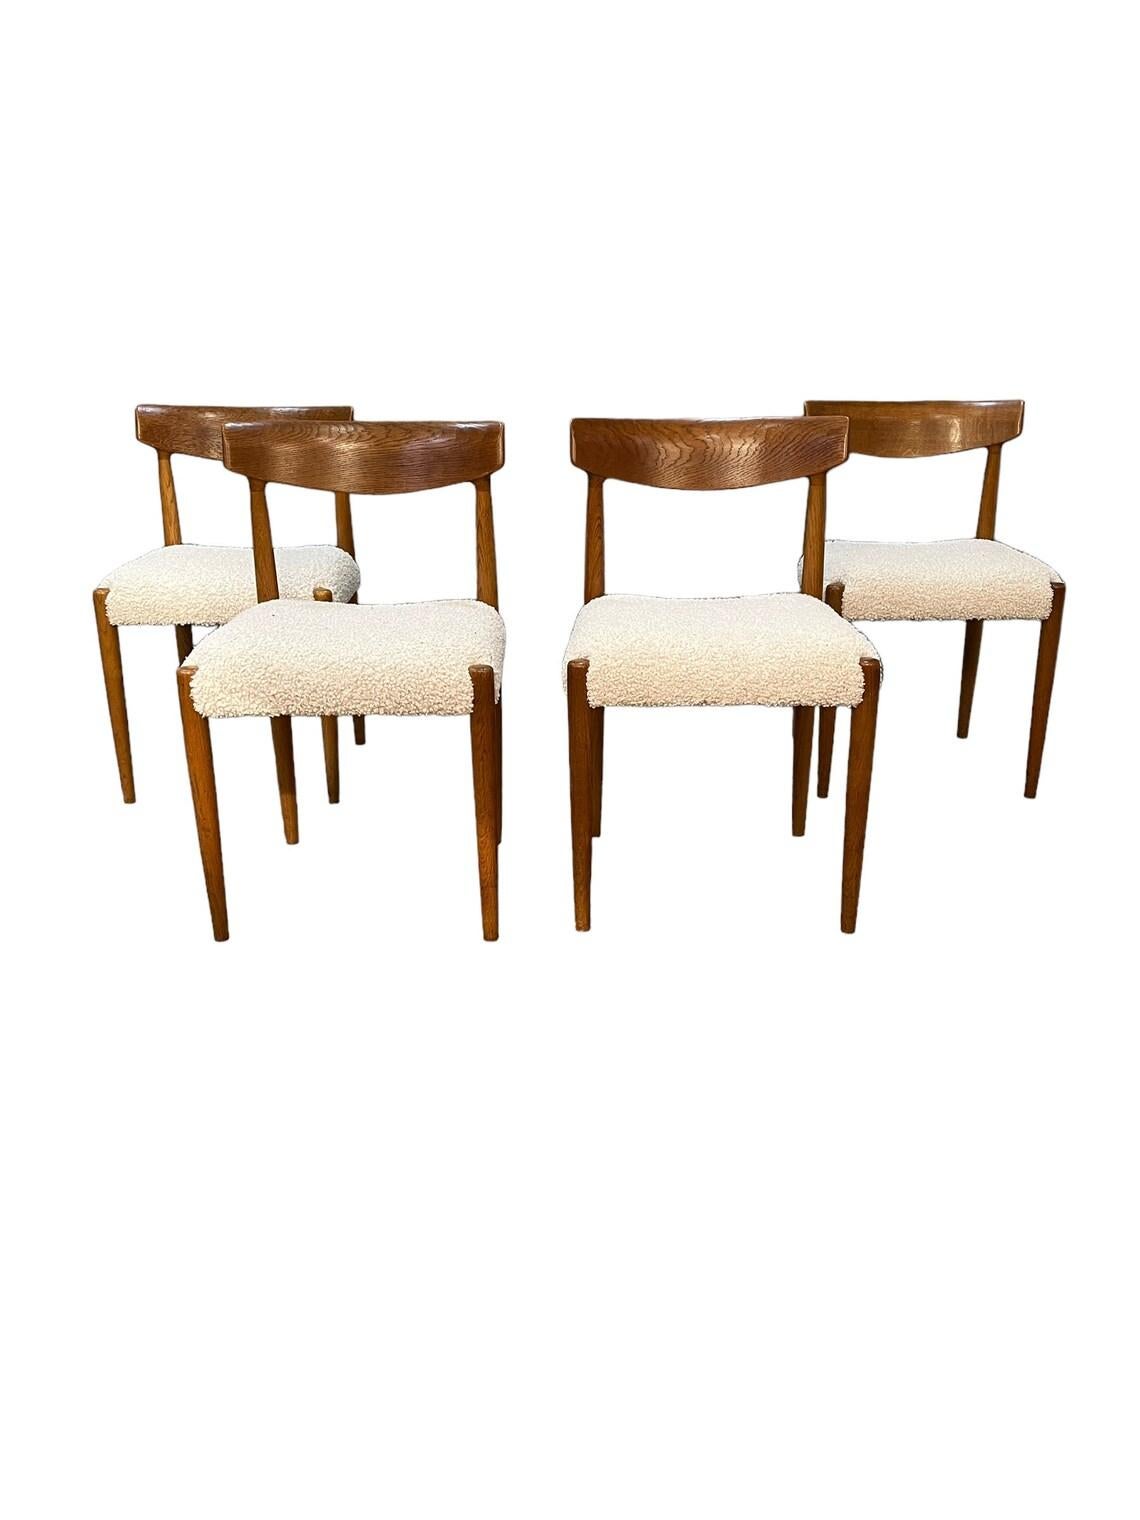 Curated Mid-Century danish teak dining chairs set of 4 completely restored with brand new Cotton boucle Upholstery. 
sturdy and comfy condition like new.

dimensions: W19 x D18 x H31.5 inches 
Seat height: 19 inches